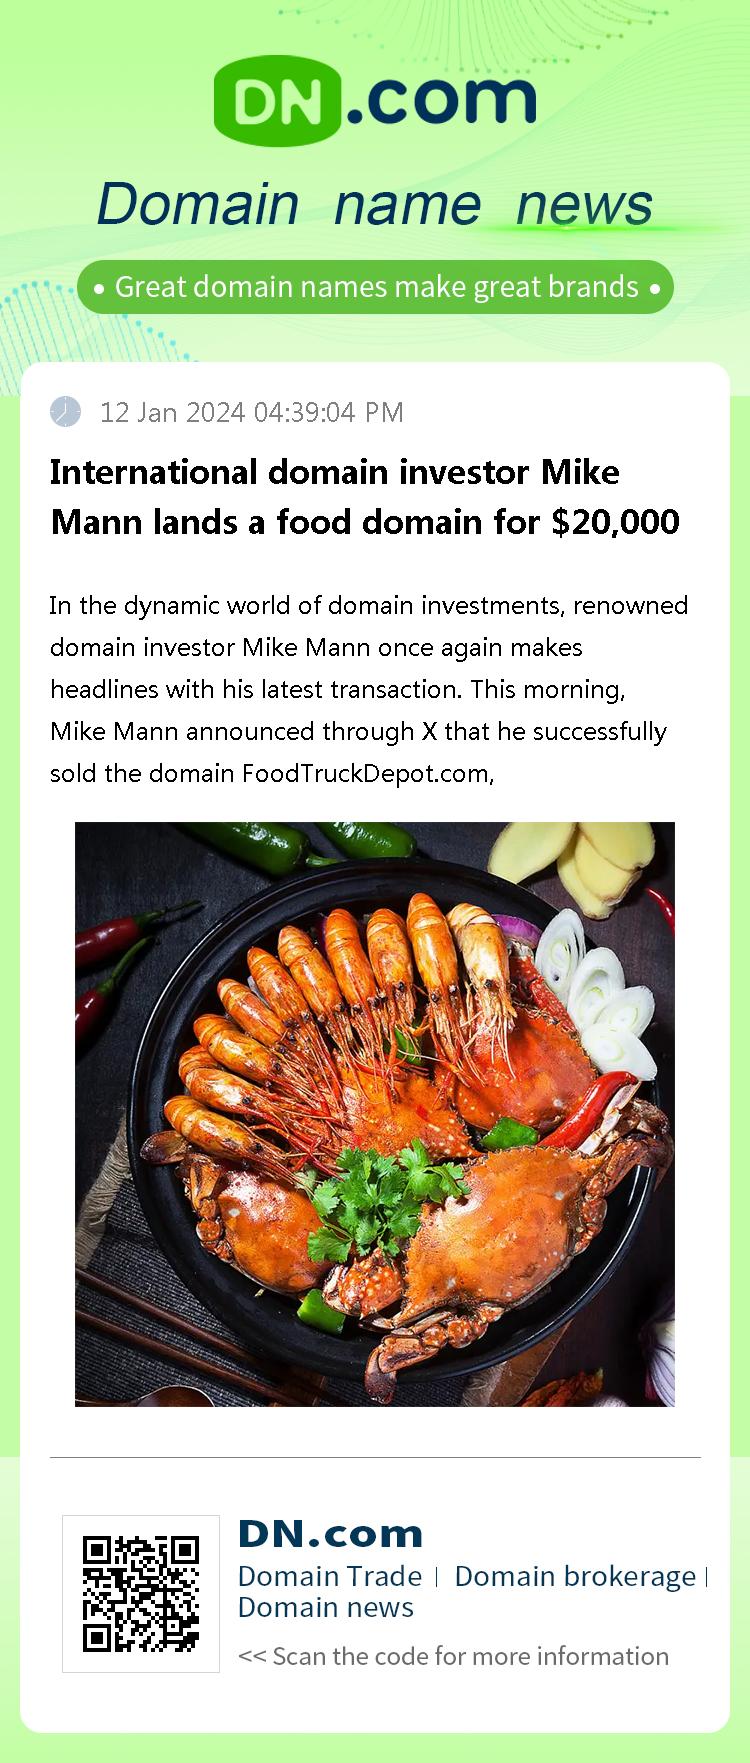 International domain investor Mike Mann lands a food domain for $20,000